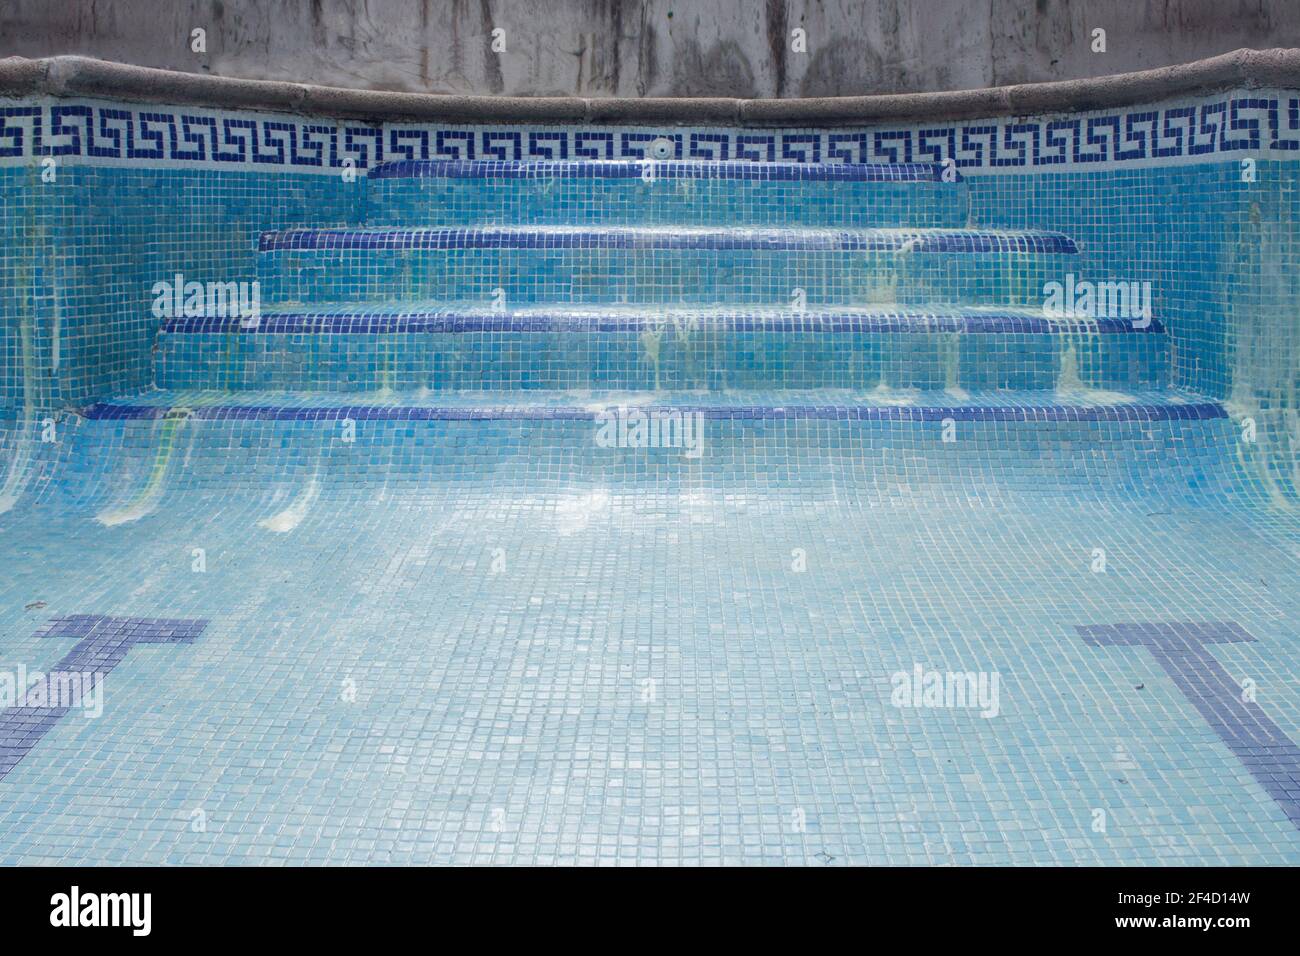 Blue tile swimming pool stairs ladder without water with rests of hydrochloric acid. Stock Photo